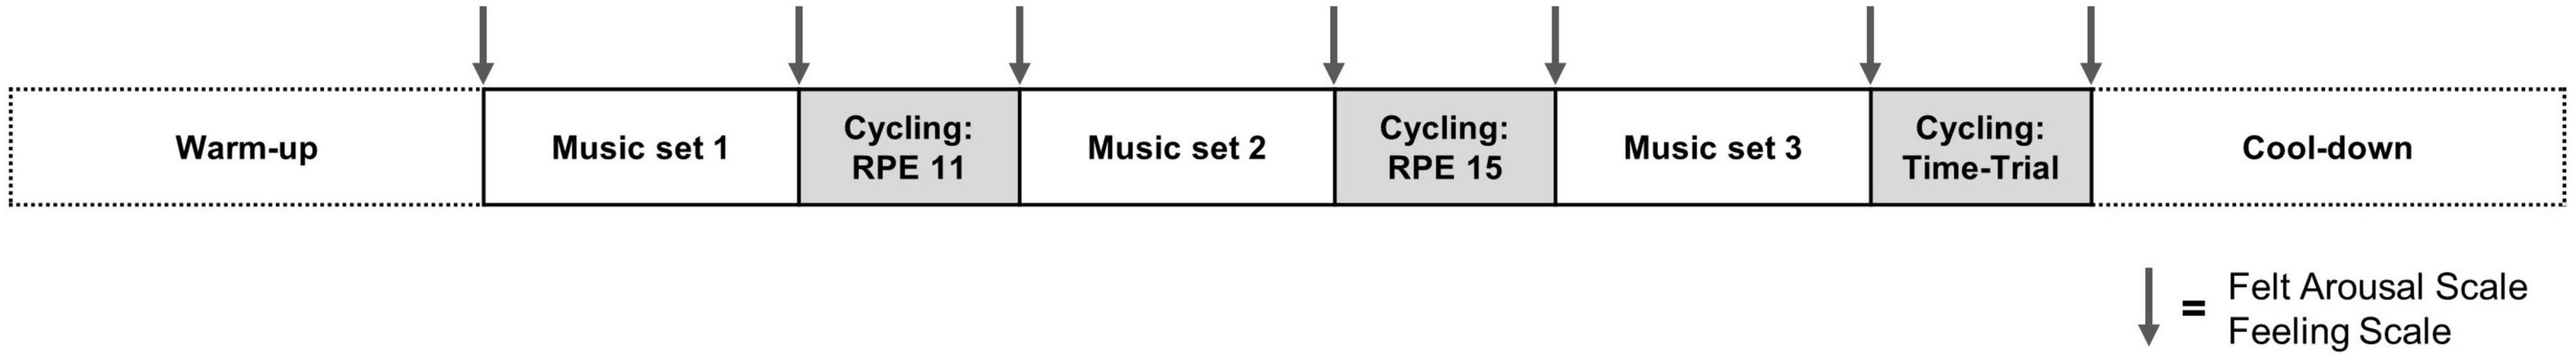 Frontiers | Music Augmented With Isochronic Auditory Beats or Vibrotactile Stimulation Does Not Affect Subsequent Ergometer Performance: A Pilot Study